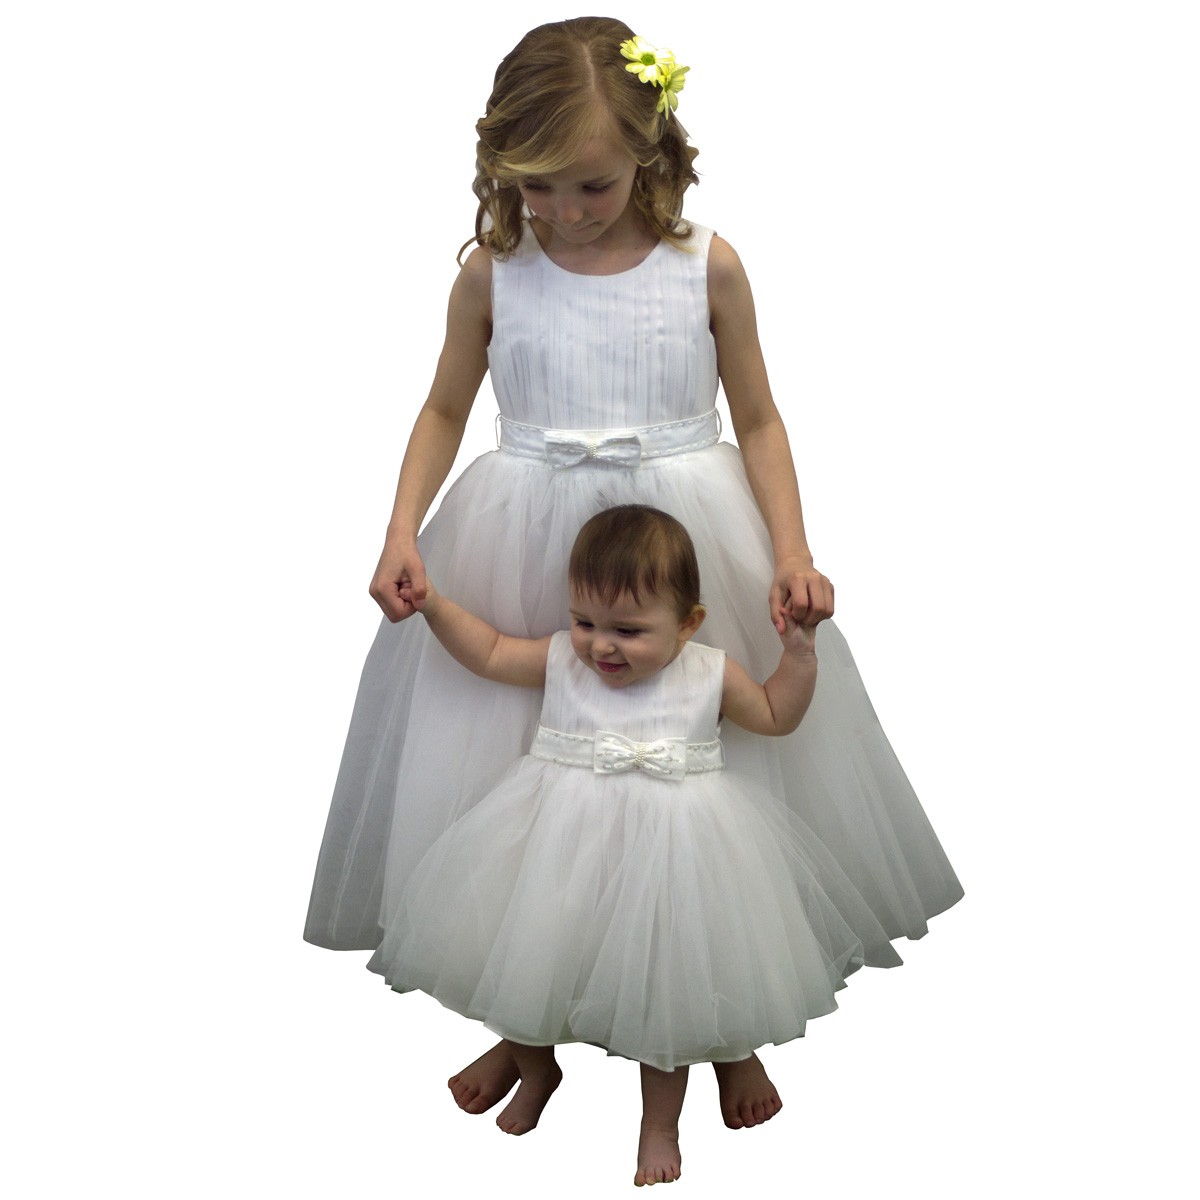 baby girl white occasion dress